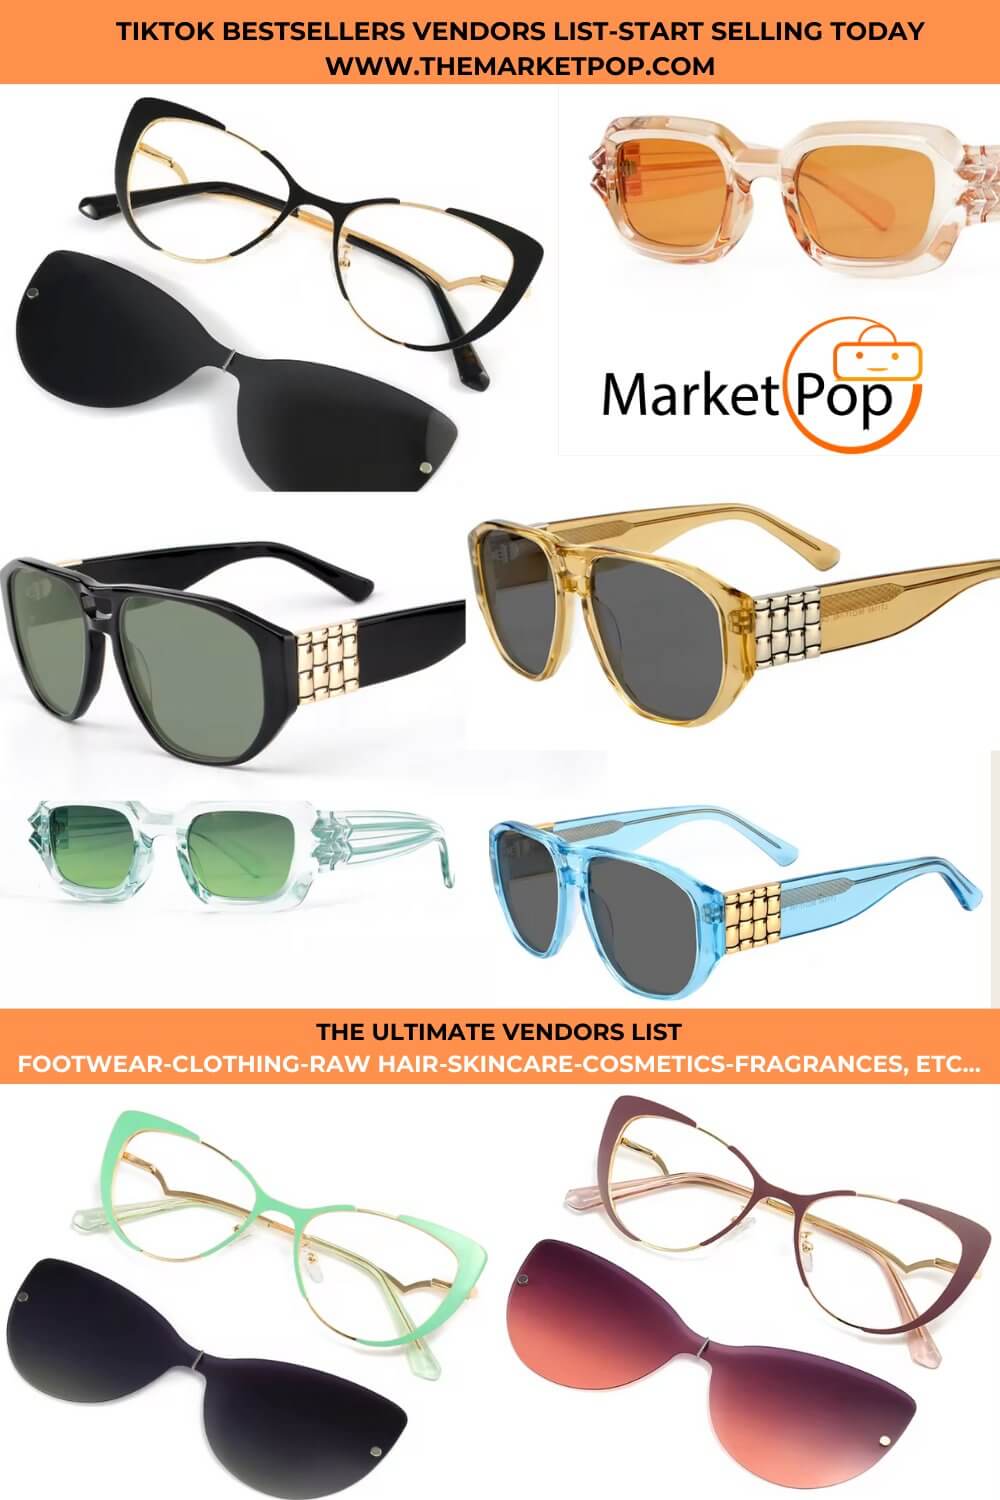 Wholesale jewelry and fashion suppliers -The Market Pop 